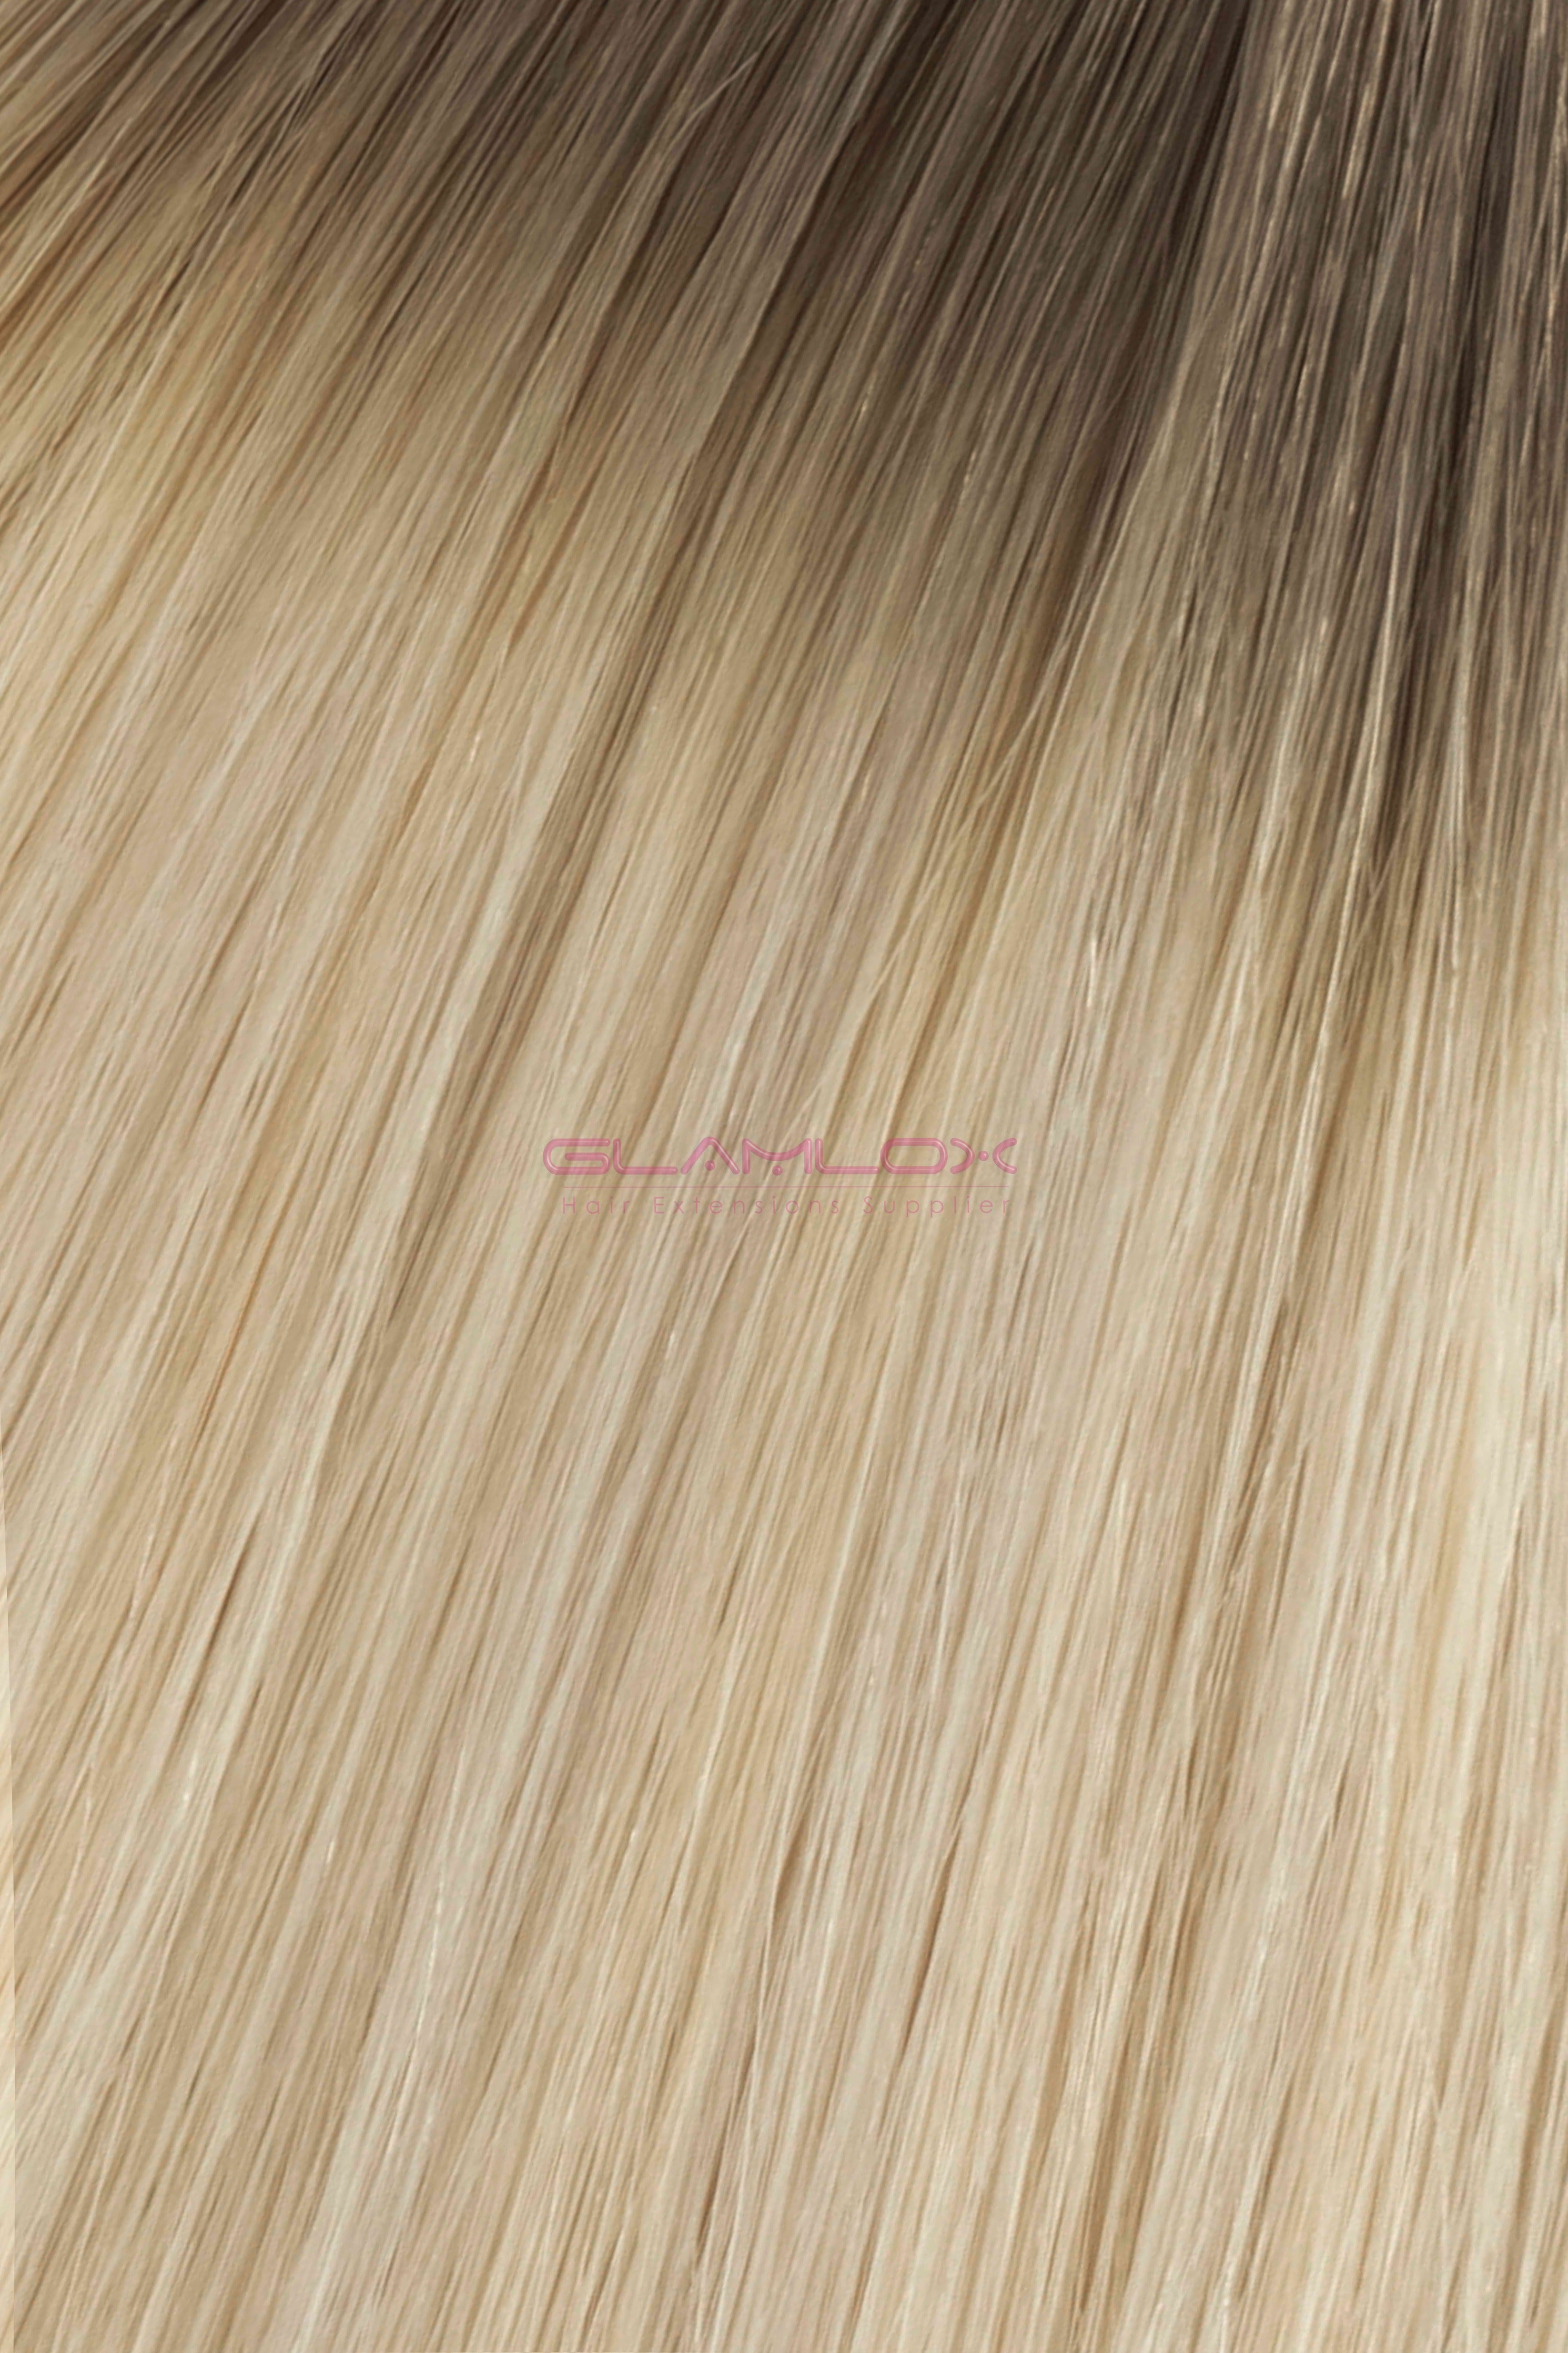 16" Full Weft Hair Extensions - Russian Mongolian Double Drawn Remy Human Hair